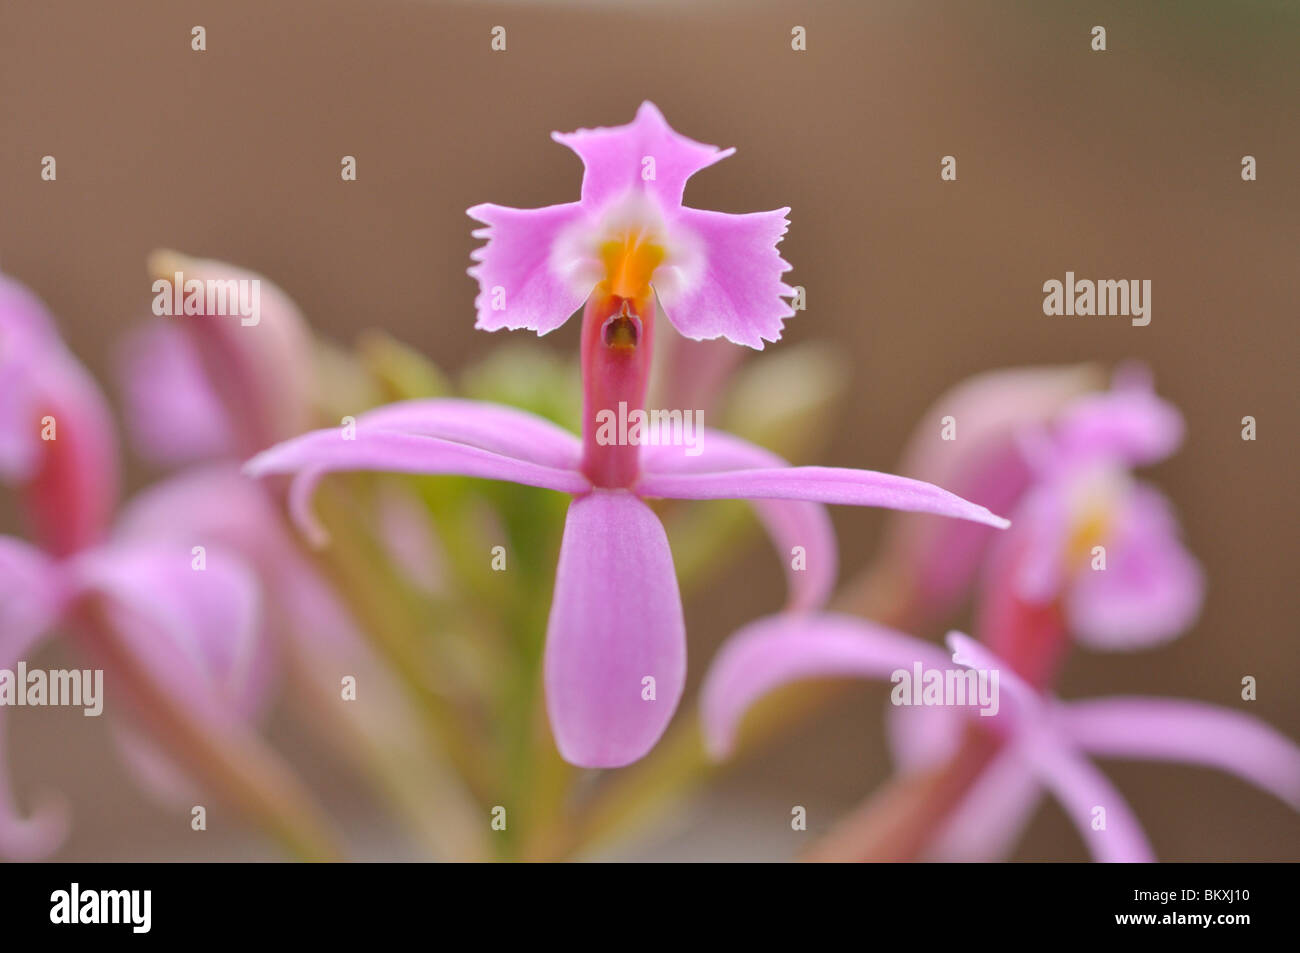 Lopsided star orchid (Epidendrum secundum) Stock Photo